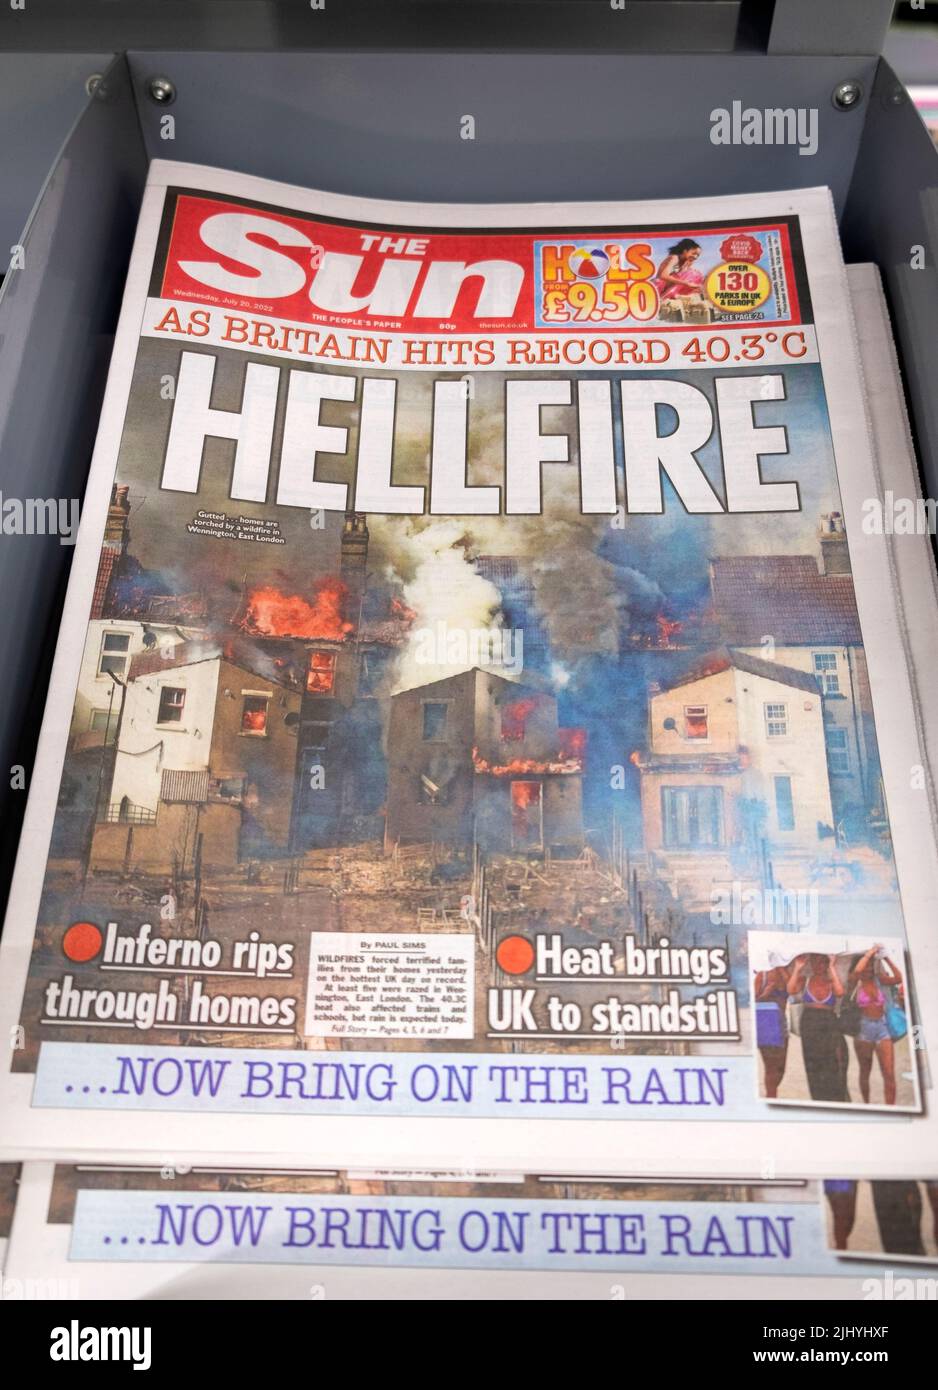 Front page of The Sun climate crisis newspaper headline 'As Britain Hits Record 40.3°C 20 July 2022 40°C Hellfire' homes burning in heatwave London UK Stock Photo